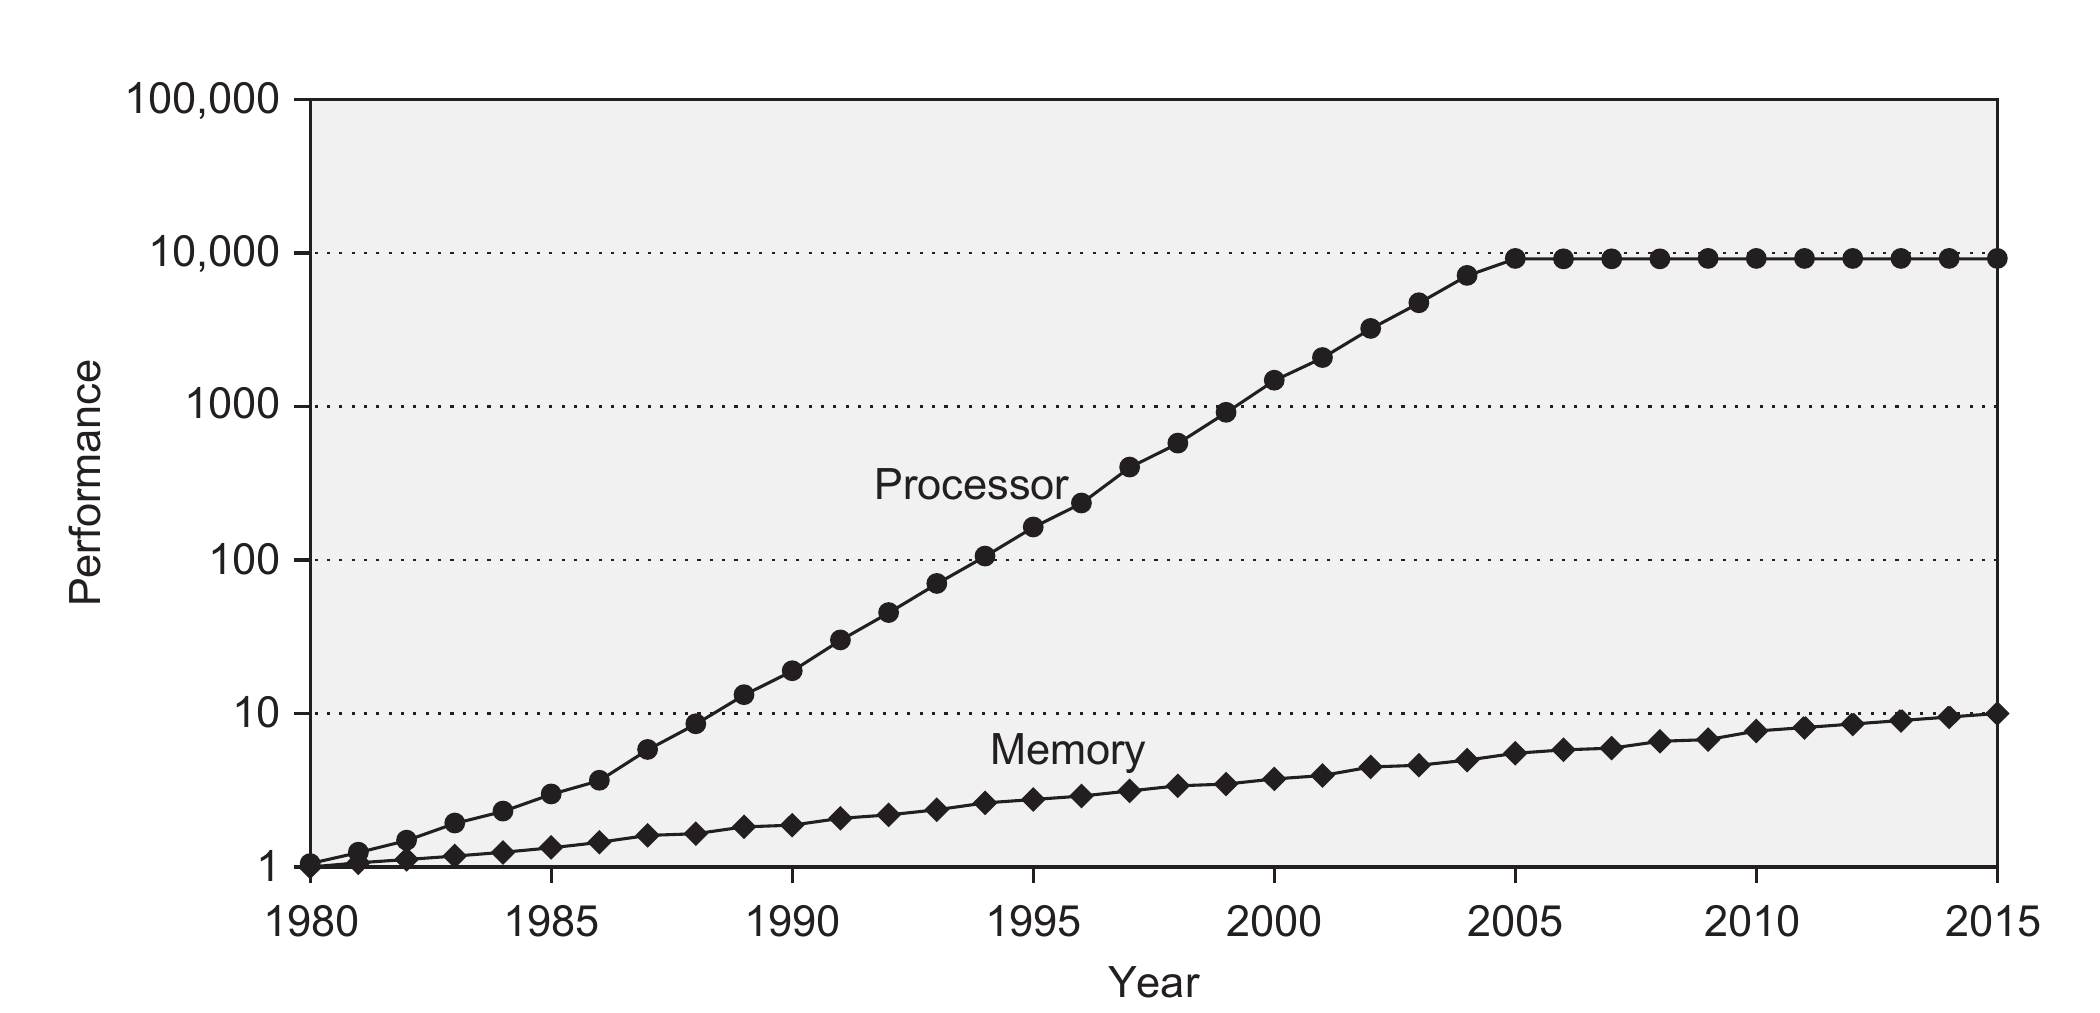 Illustration of the performance gap between memory and CPU